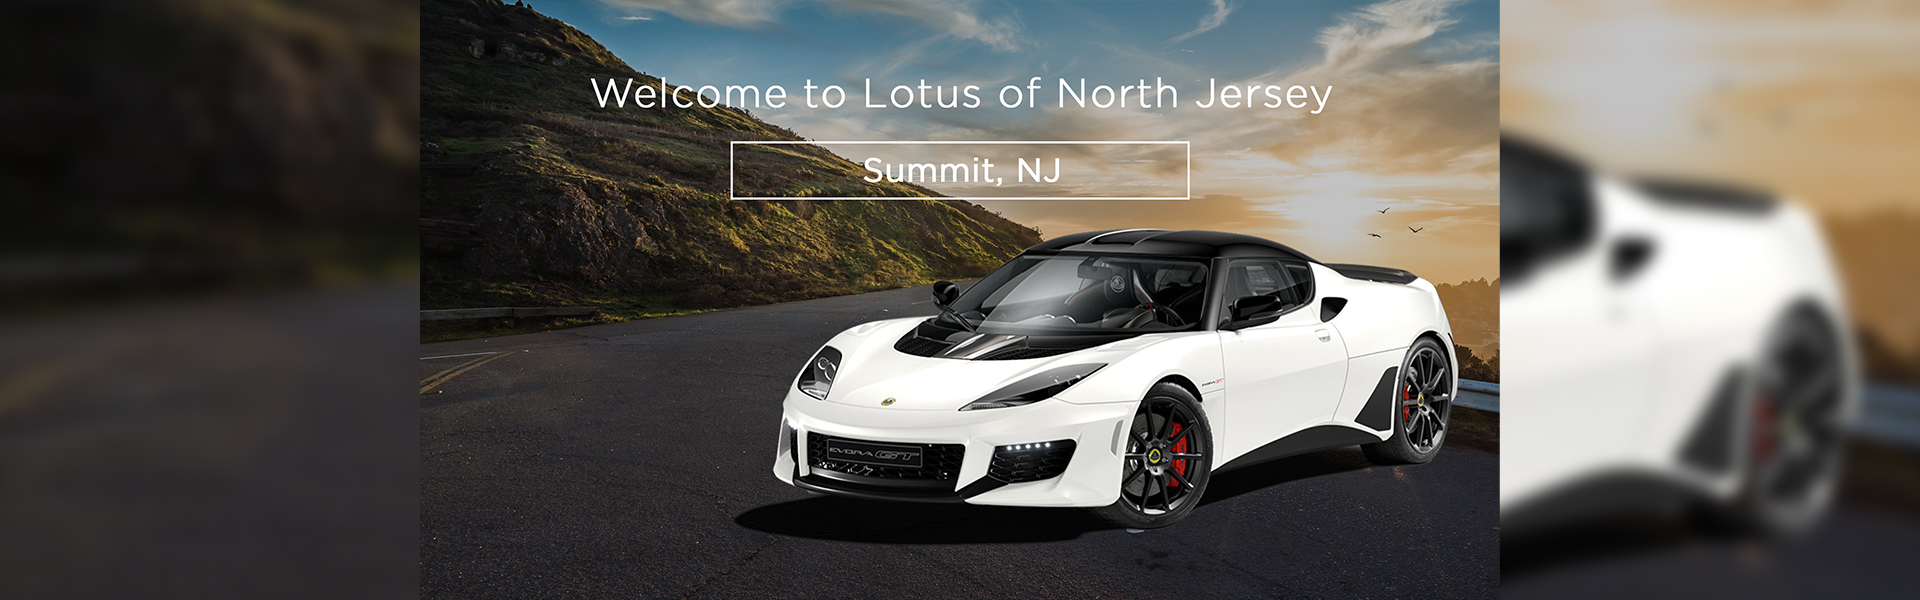 Welcome to Lotus Cars